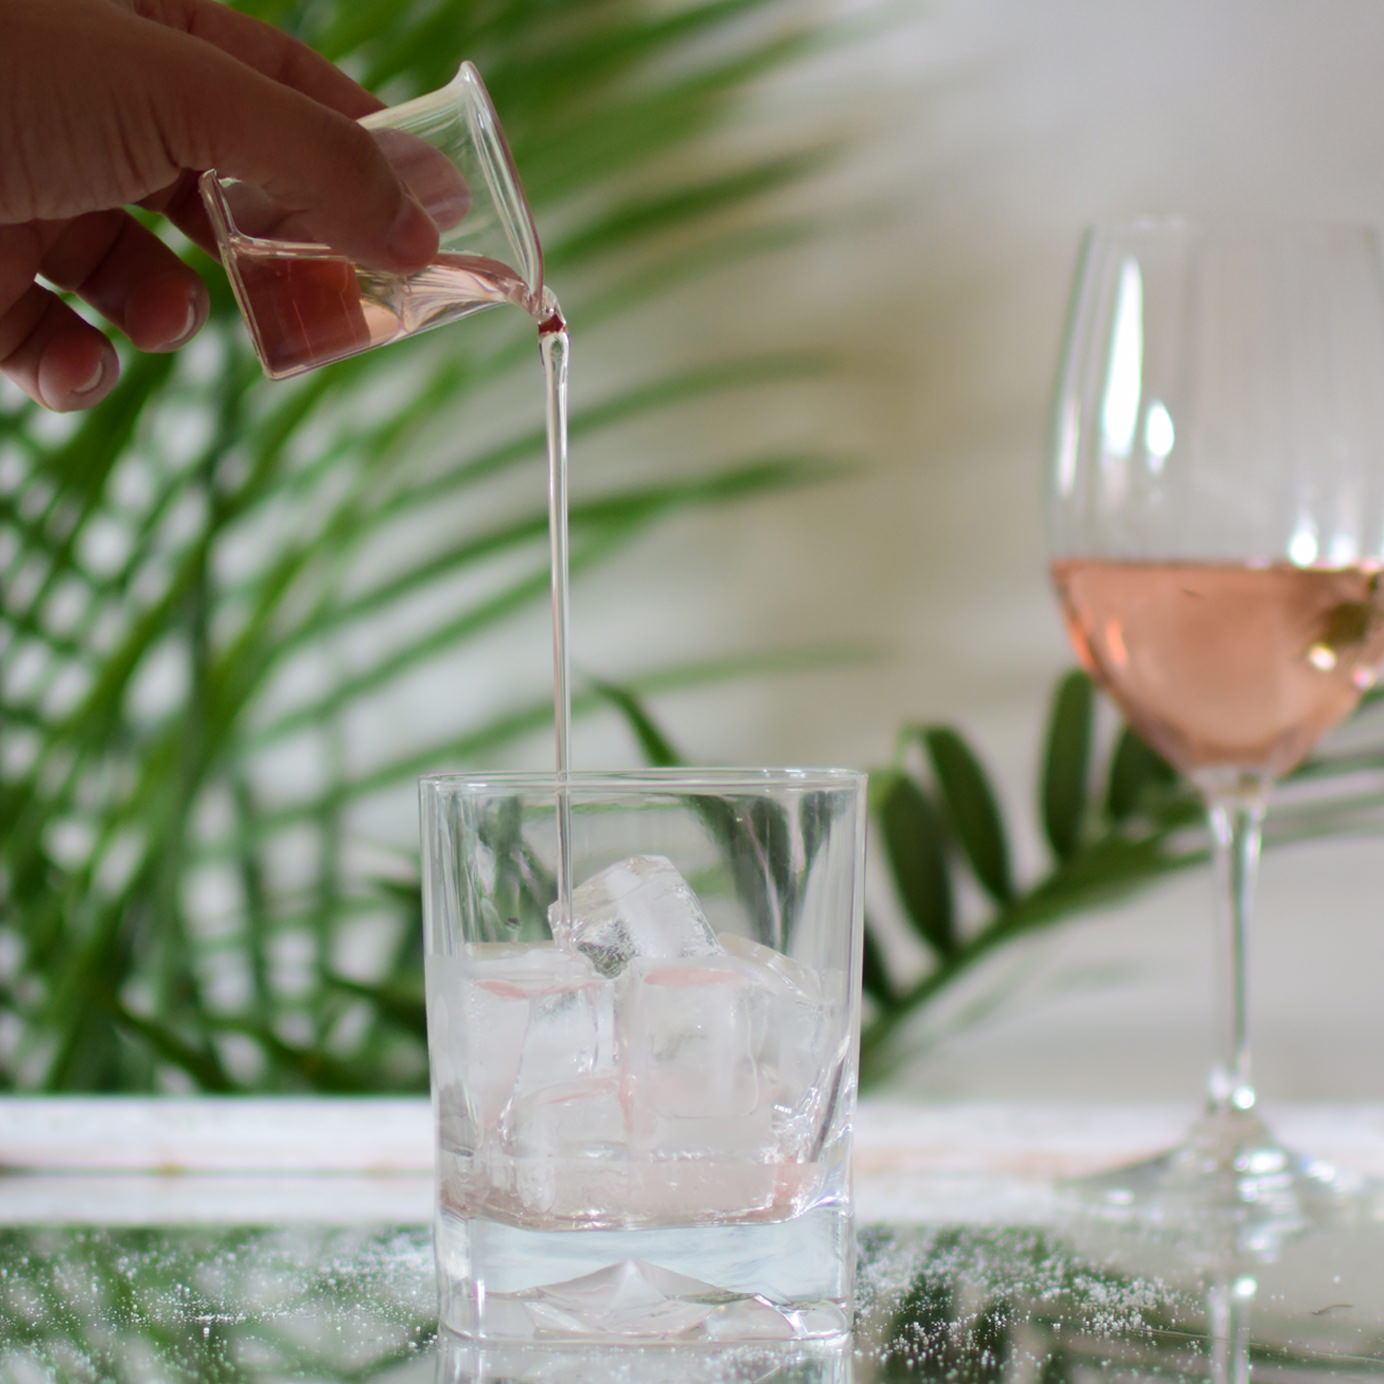 How to Make Rosé Simple Syrup That Makes Cocktails Blush